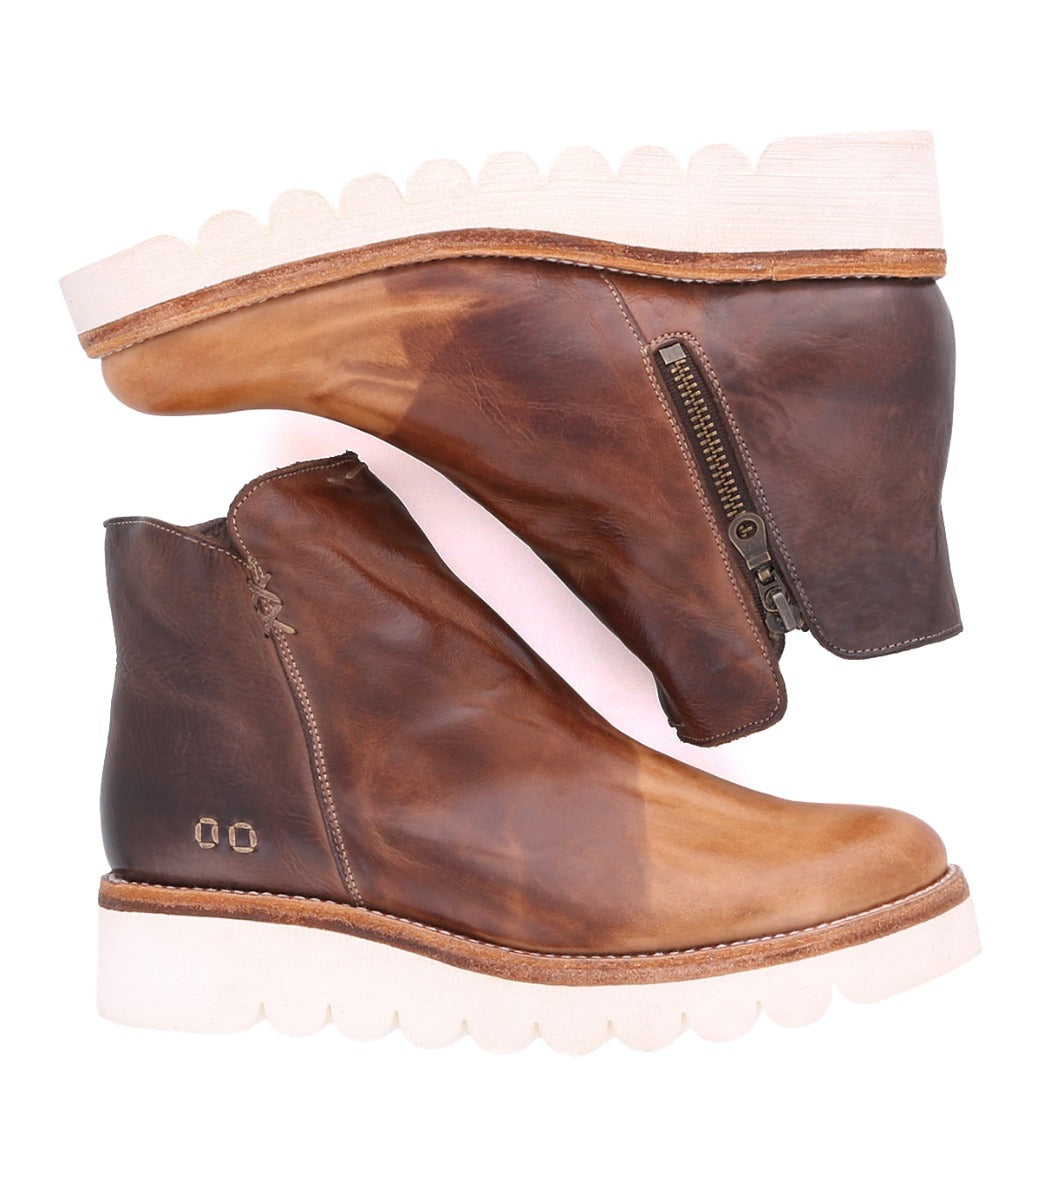 A pair of Lydyi brown leather ankle boots with white soles by Bed Stu.